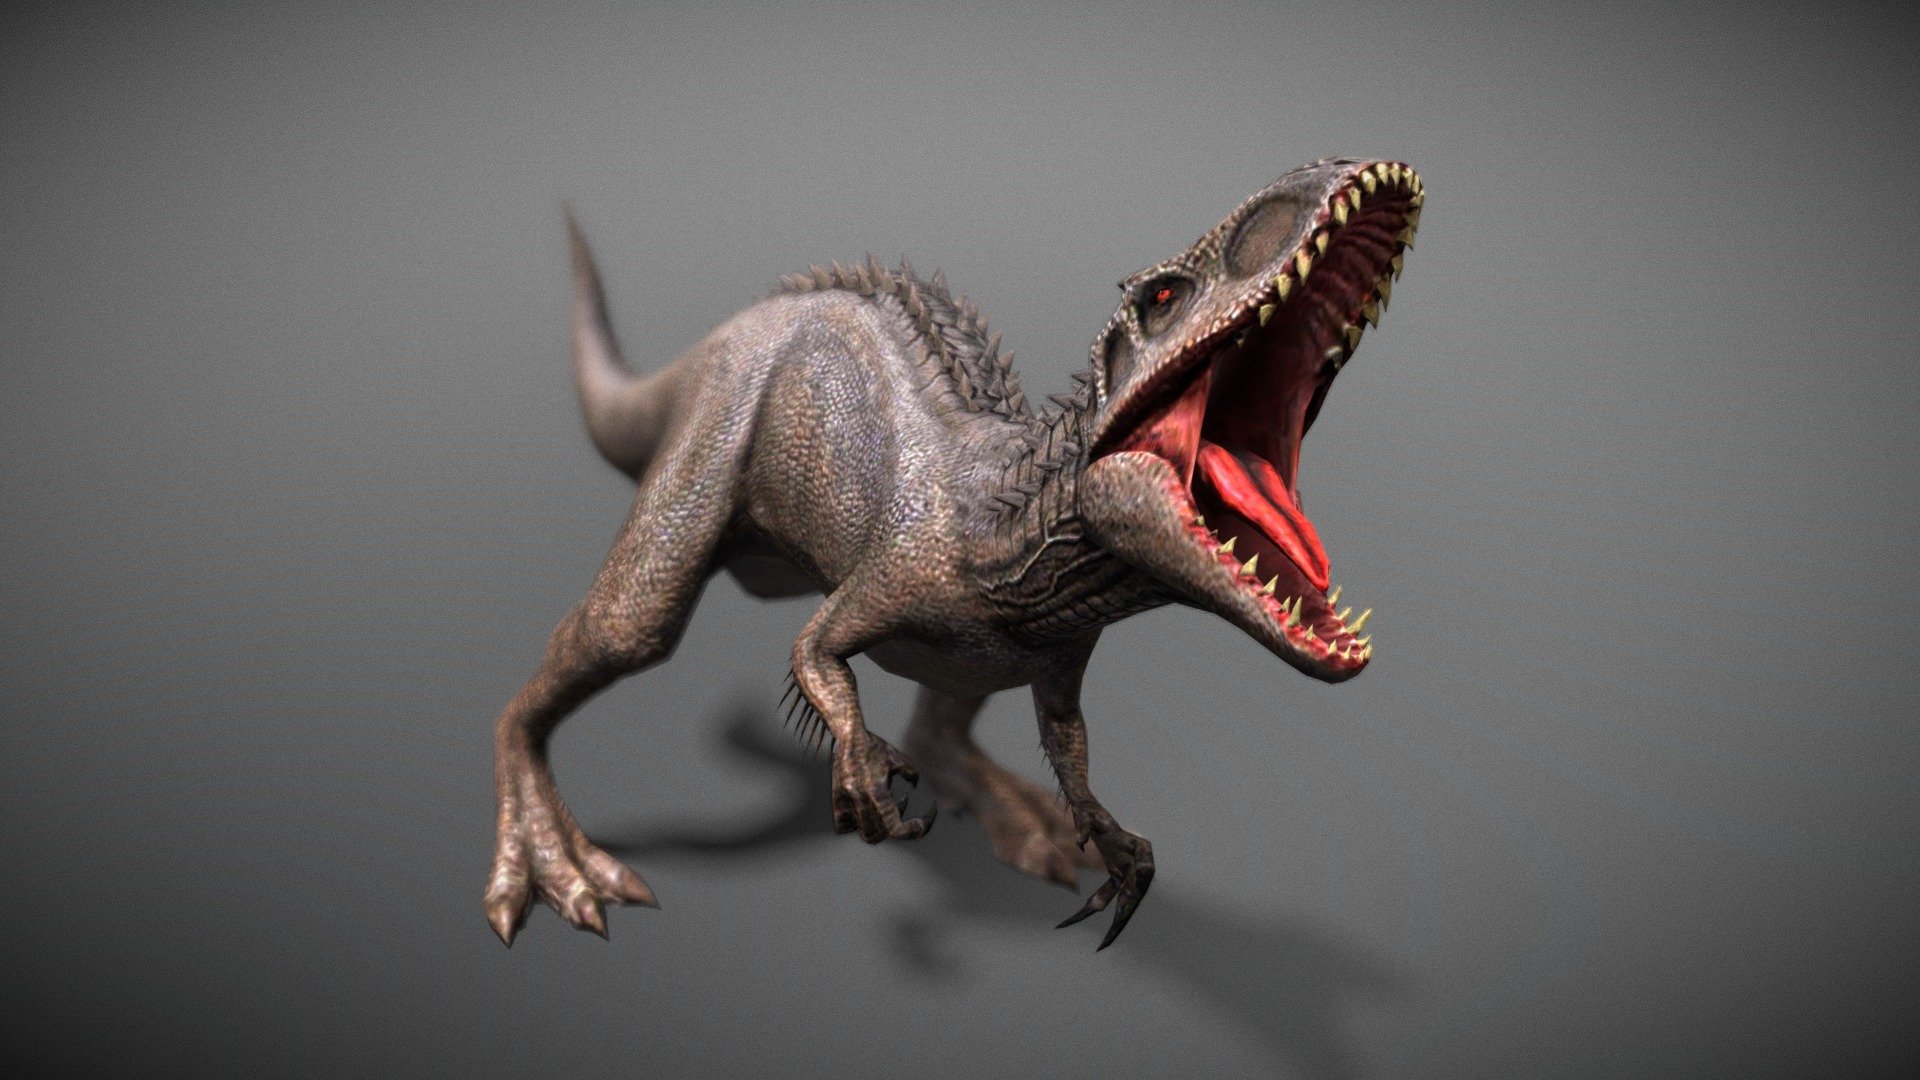 The Indominus Rex model from Jurassic World Alive. Credit goes to Ludia for making the model and the game.

 - Jurassic World Alive - Indominus Rex - 3D model by Indominus Rex (@lentoneulb) 3d model